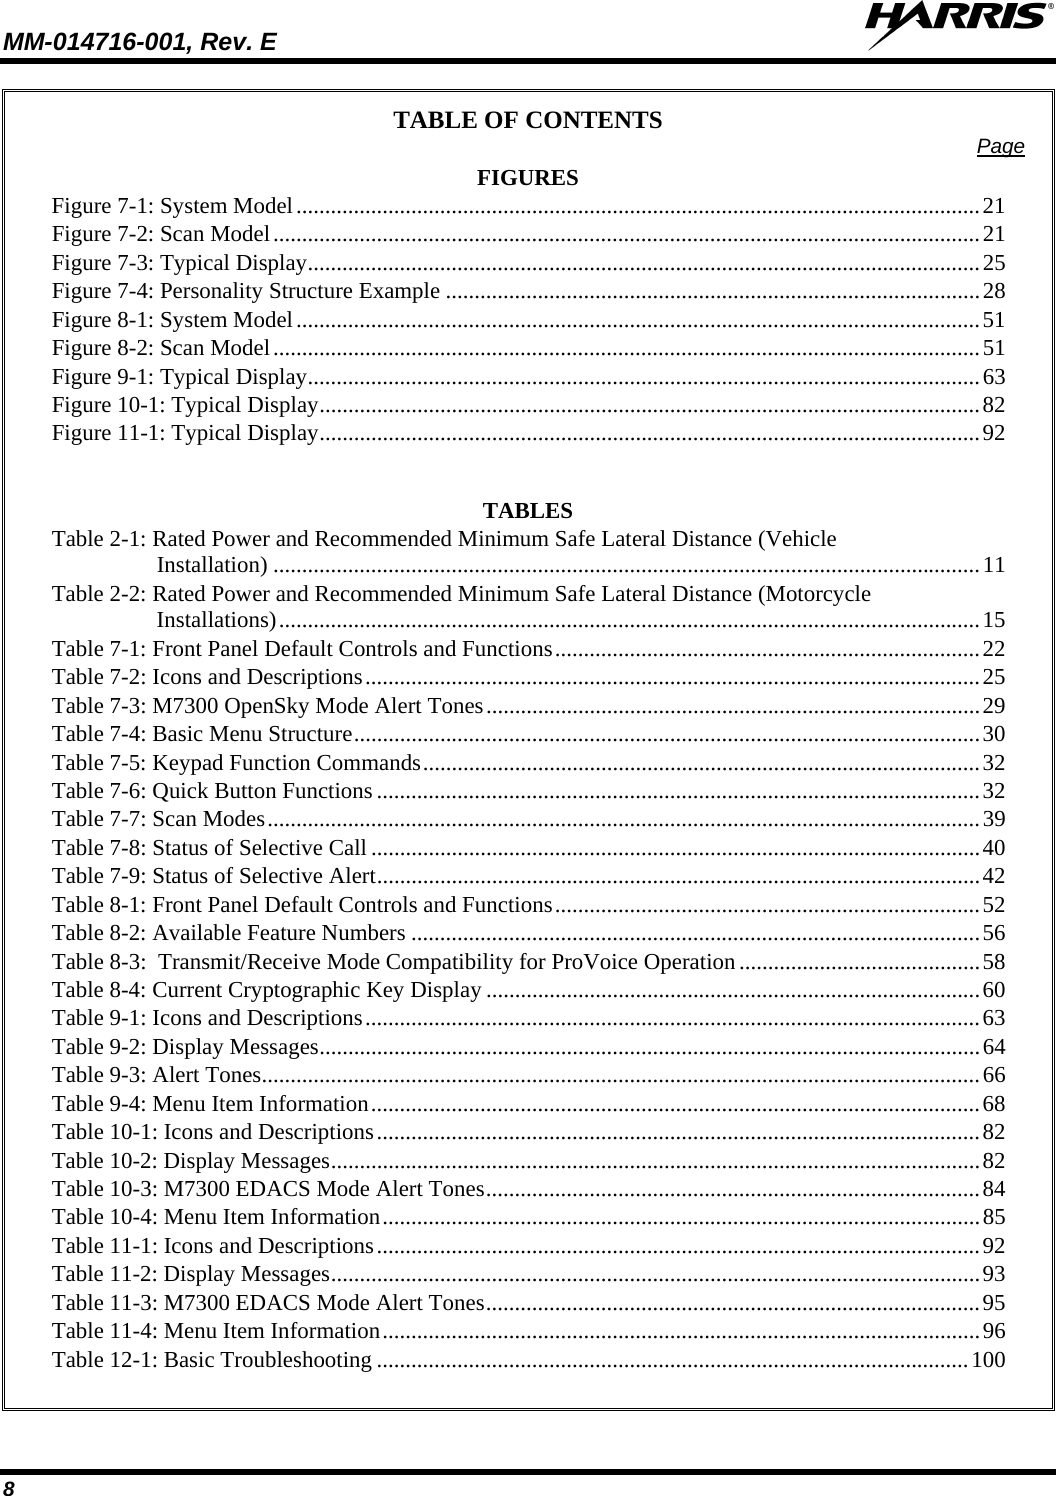 MM-014716-001, Rev. E  8 TABLE OF CONTENTS  Page FIGURES Figure 7-1: System Model.......................................................................................................................21 Figure 7-2: Scan Model...........................................................................................................................21 Figure 7-3: Typical Display.....................................................................................................................25 Figure 7-4: Personality Structure Example .............................................................................................28 Figure 8-1: System Model.......................................................................................................................51 Figure 8-2: Scan Model...........................................................................................................................51 Figure 9-1: Typical Display.....................................................................................................................63 Figure 10-1: Typical Display...................................................................................................................82 Figure 11-1: Typical Display...................................................................................................................92   TABLES Table 2-1: Rated Power and Recommended Minimum Safe Lateral Distance (Vehicle Installation) ...........................................................................................................................11 Table 2-2: Rated Power and Recommended Minimum Safe Lateral Distance (Motorcycle Installations)..........................................................................................................................15 Table 7-1: Front Panel Default Controls and Functions..........................................................................22 Table 7-2: Icons and Descriptions...........................................................................................................25 Table 7-3: M7300 OpenSky Mode Alert Tones......................................................................................29 Table 7-4: Basic Menu Structure.............................................................................................................30 Table 7-5: Keypad Function Commands.................................................................................................32 Table 7-6: Quick Button Functions .........................................................................................................32 Table 7-7: Scan Modes............................................................................................................................39 Table 7-8: Status of Selective Call ..........................................................................................................40 Table 7-9: Status of Selective Alert.........................................................................................................42 Table 8-1: Front Panel Default Controls and Functions..........................................................................52 Table 8-2: Available Feature Numbers ...................................................................................................56 Table 8-3:  Transmit/Receive Mode Compatibility for ProVoice Operation..........................................58 Table 8-4: Current Cryptographic Key Display ......................................................................................60 Table 9-1: Icons and Descriptions...........................................................................................................63 Table 9-2: Display Messages...................................................................................................................64 Table 9-3: Alert Tones.............................................................................................................................66 Table 9-4: Menu Item Information..........................................................................................................68 Table 10-1: Icons and Descriptions.........................................................................................................82 Table 10-2: Display Messages.................................................................................................................82 Table 10-3: M7300 EDACS Mode Alert Tones......................................................................................84 Table 10-4: Menu Item Information........................................................................................................85 Table 11-1: Icons and Descriptions.........................................................................................................92 Table 11-2: Display Messages.................................................................................................................93 Table 11-3: M7300 EDACS Mode Alert Tones......................................................................................95 Table 11-4: Menu Item Information........................................................................................................96 Table 12-1: Basic Troubleshooting .......................................................................................................100  